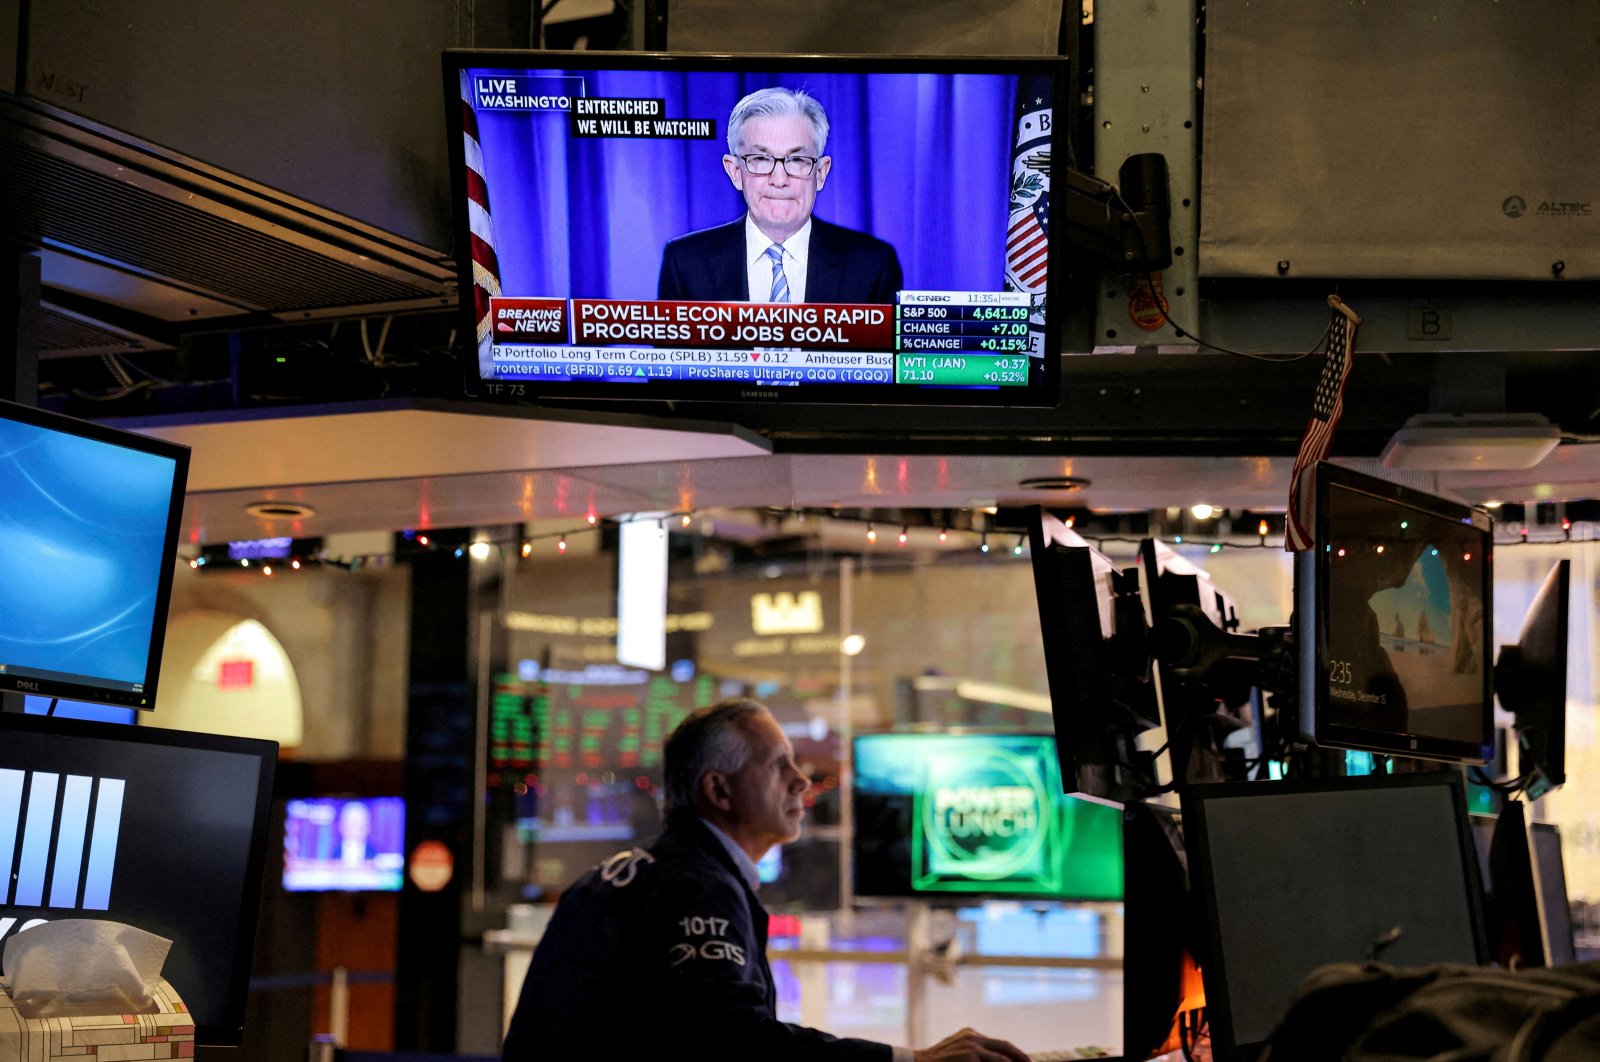 U.S. Federal Reserve (Fed) Chair Jerome Powell is seen delivering remarks on a screen as a trader works on the trading floor at the New York Stock Exchange (NYSE) in Manhattan, New York City, U.S., Dec. 15, 2021. (Reuters Photo)